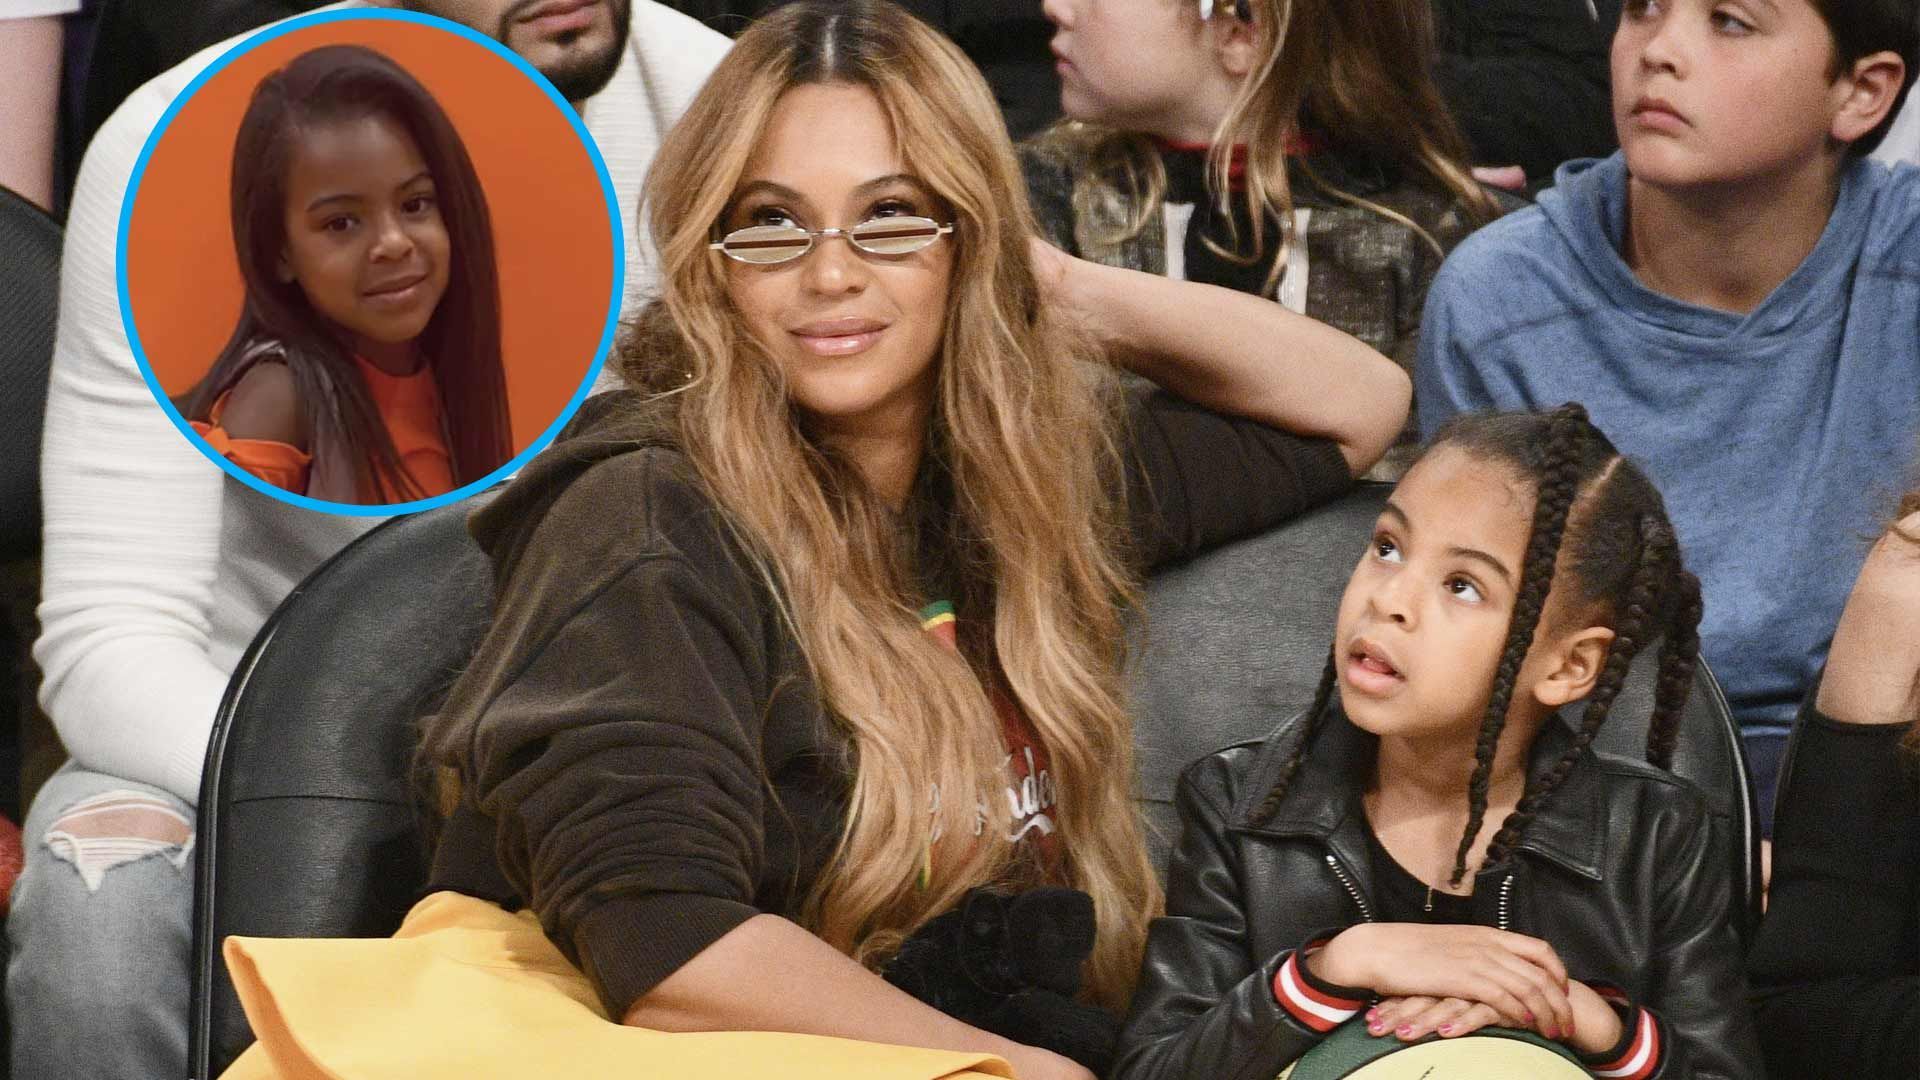 Check Out How Grown Up Blue Ivy Looks! Beyoncé's Dad Shares New